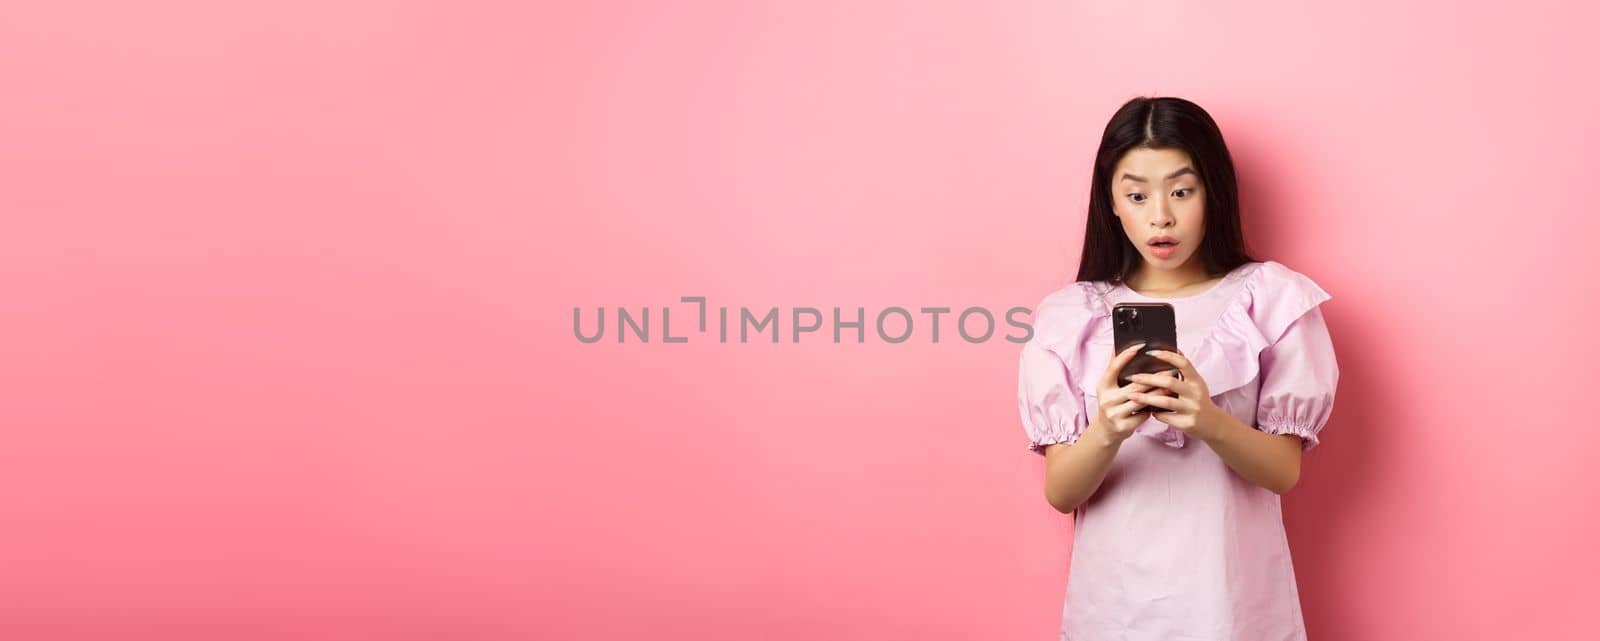 Online shopping. Asian teen girl look surprised at mobile phone screen, reading message with excited expression, standing against pink background.